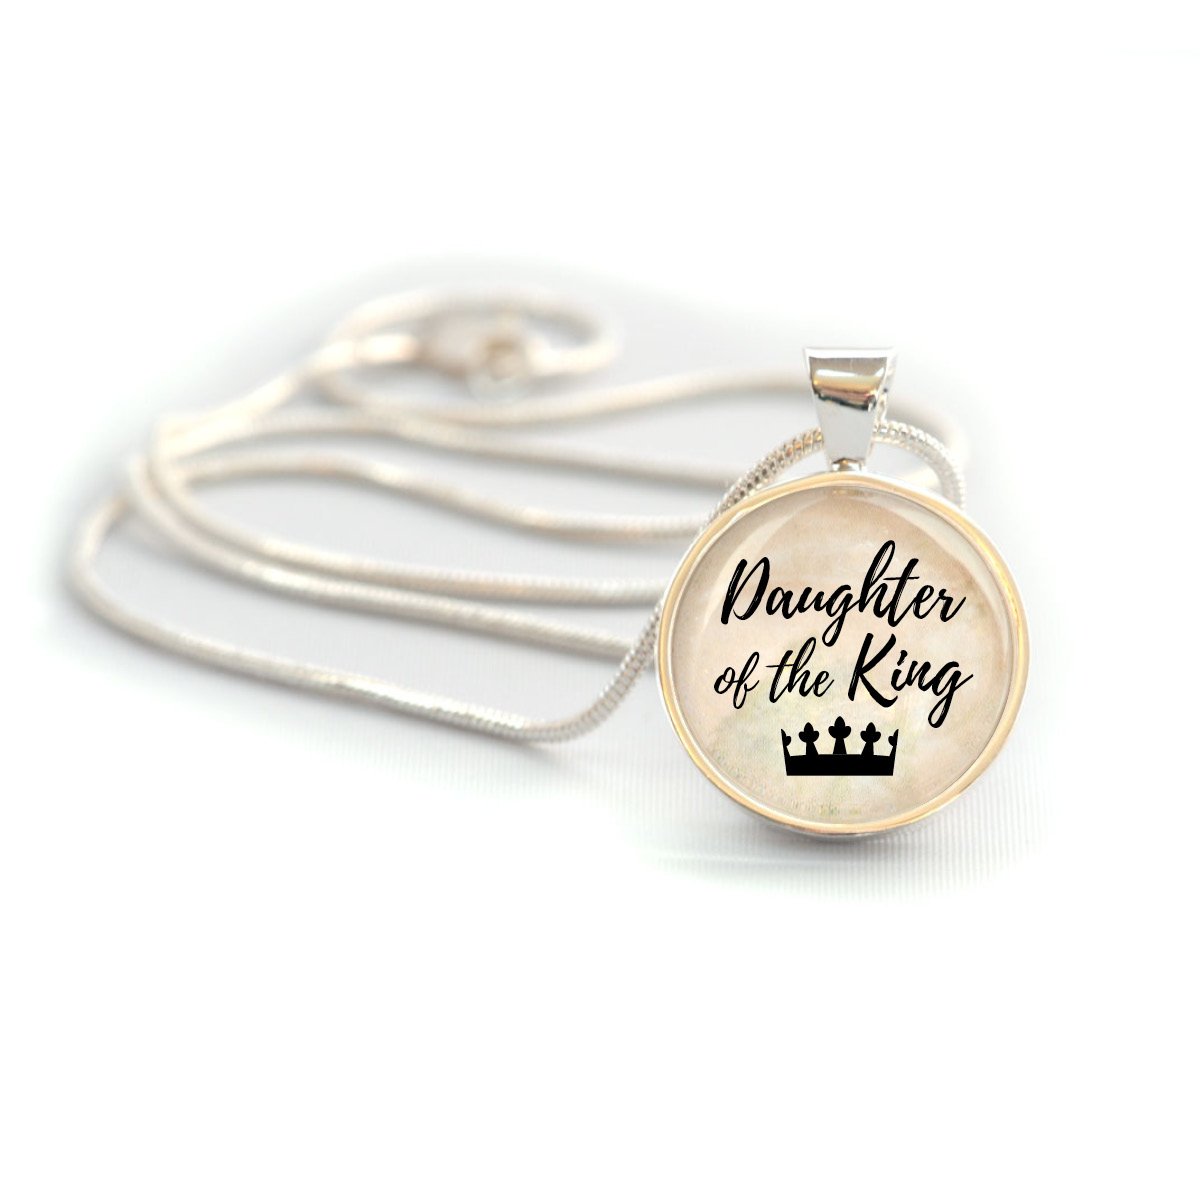 "Daughter of the King" Silver-Plated Pendant Necklace